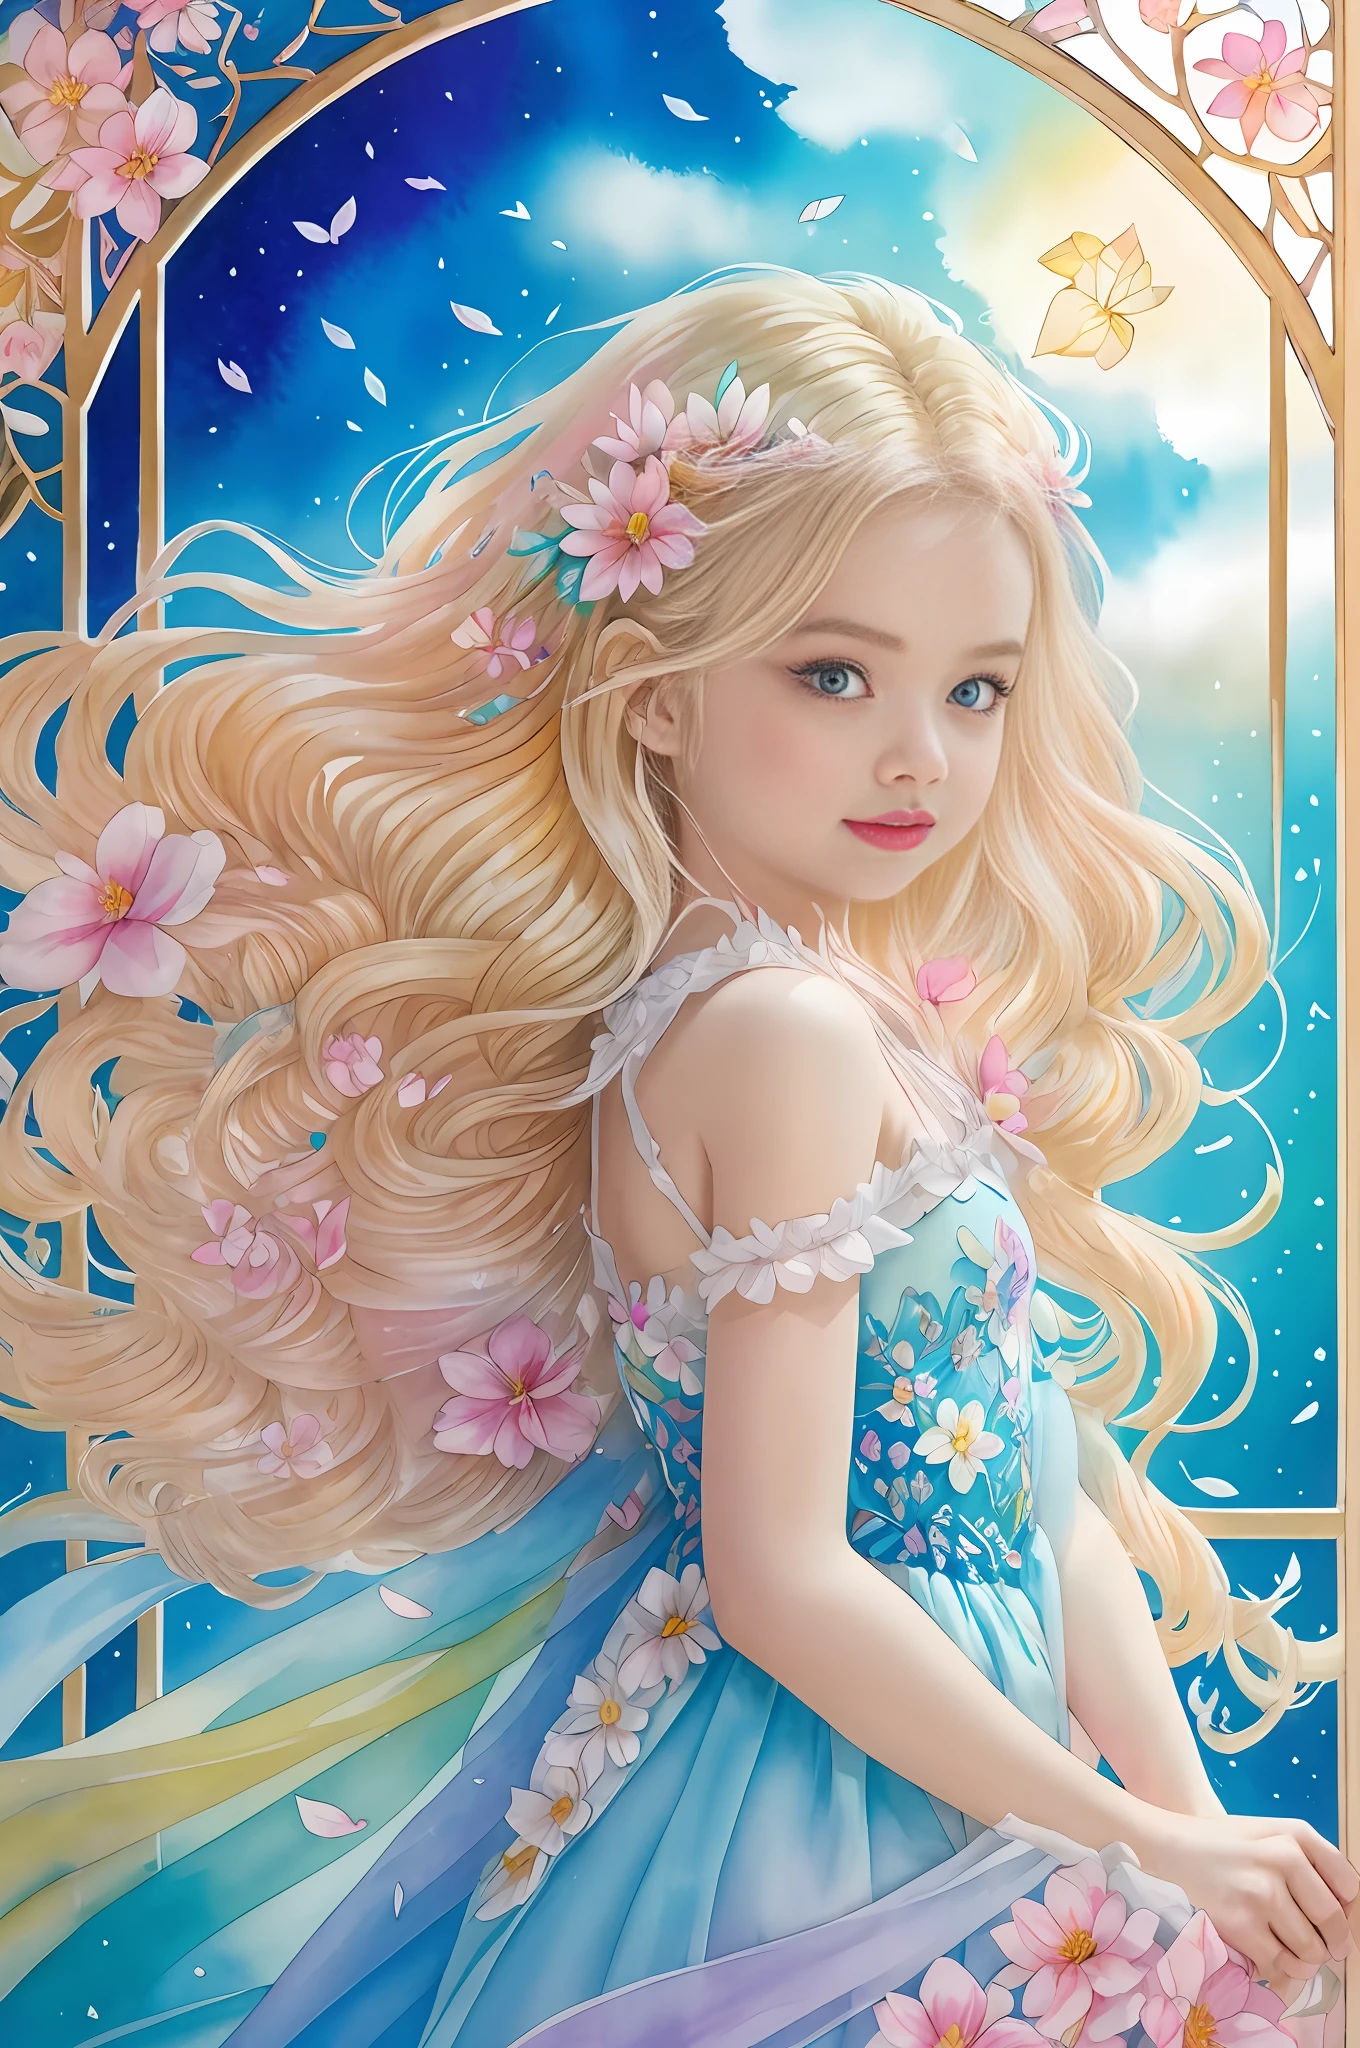 Pastel Colors, Delicate Drawings, Tide Play, Luxray, Split Color Hair, Wind, Flying Petals, Stained Glass Rhinoceros, For Decoration, Intricate Details, Dufkova, 2D, Line Art, Watercolor, Ink Watercolor, Random Color Hair, Super Long Hair, Perfect Facial Features, Beautiful Expression, Gentle Smile, Angel, Goddess, Symmetrical, Wavy, Blonde, Beautiful, Light, Wings, Feathers, well-formed limbs, perfect fingers, 1girl, alraune, flowers, alraune,